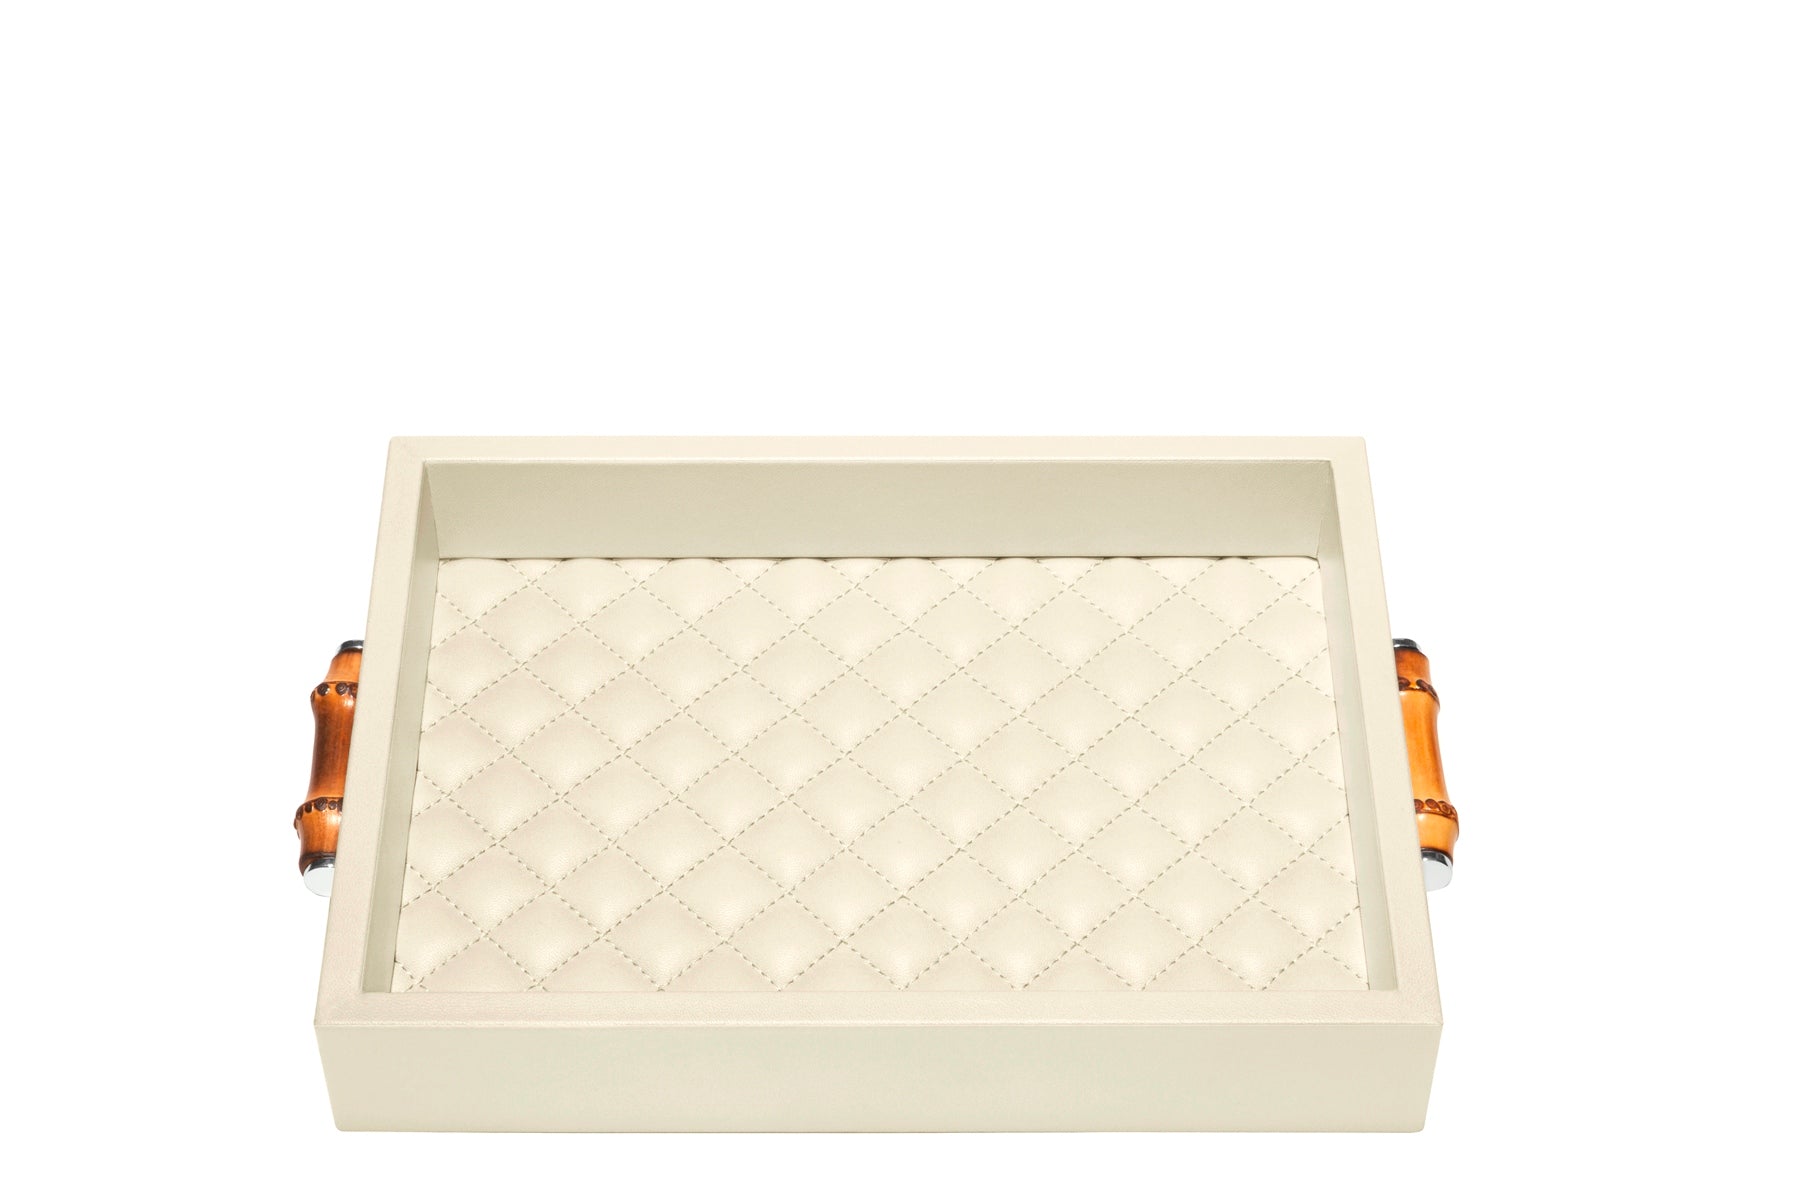 Riviere Frida Diamonds Rectangular Valet Tray | Leather Tray | Quilted Padded Lining | Small Bamboo Handles | Ideal for Yacht Decor | Available at 2Jour Concierge, #1 luxury high-end gift & lifestyle shop